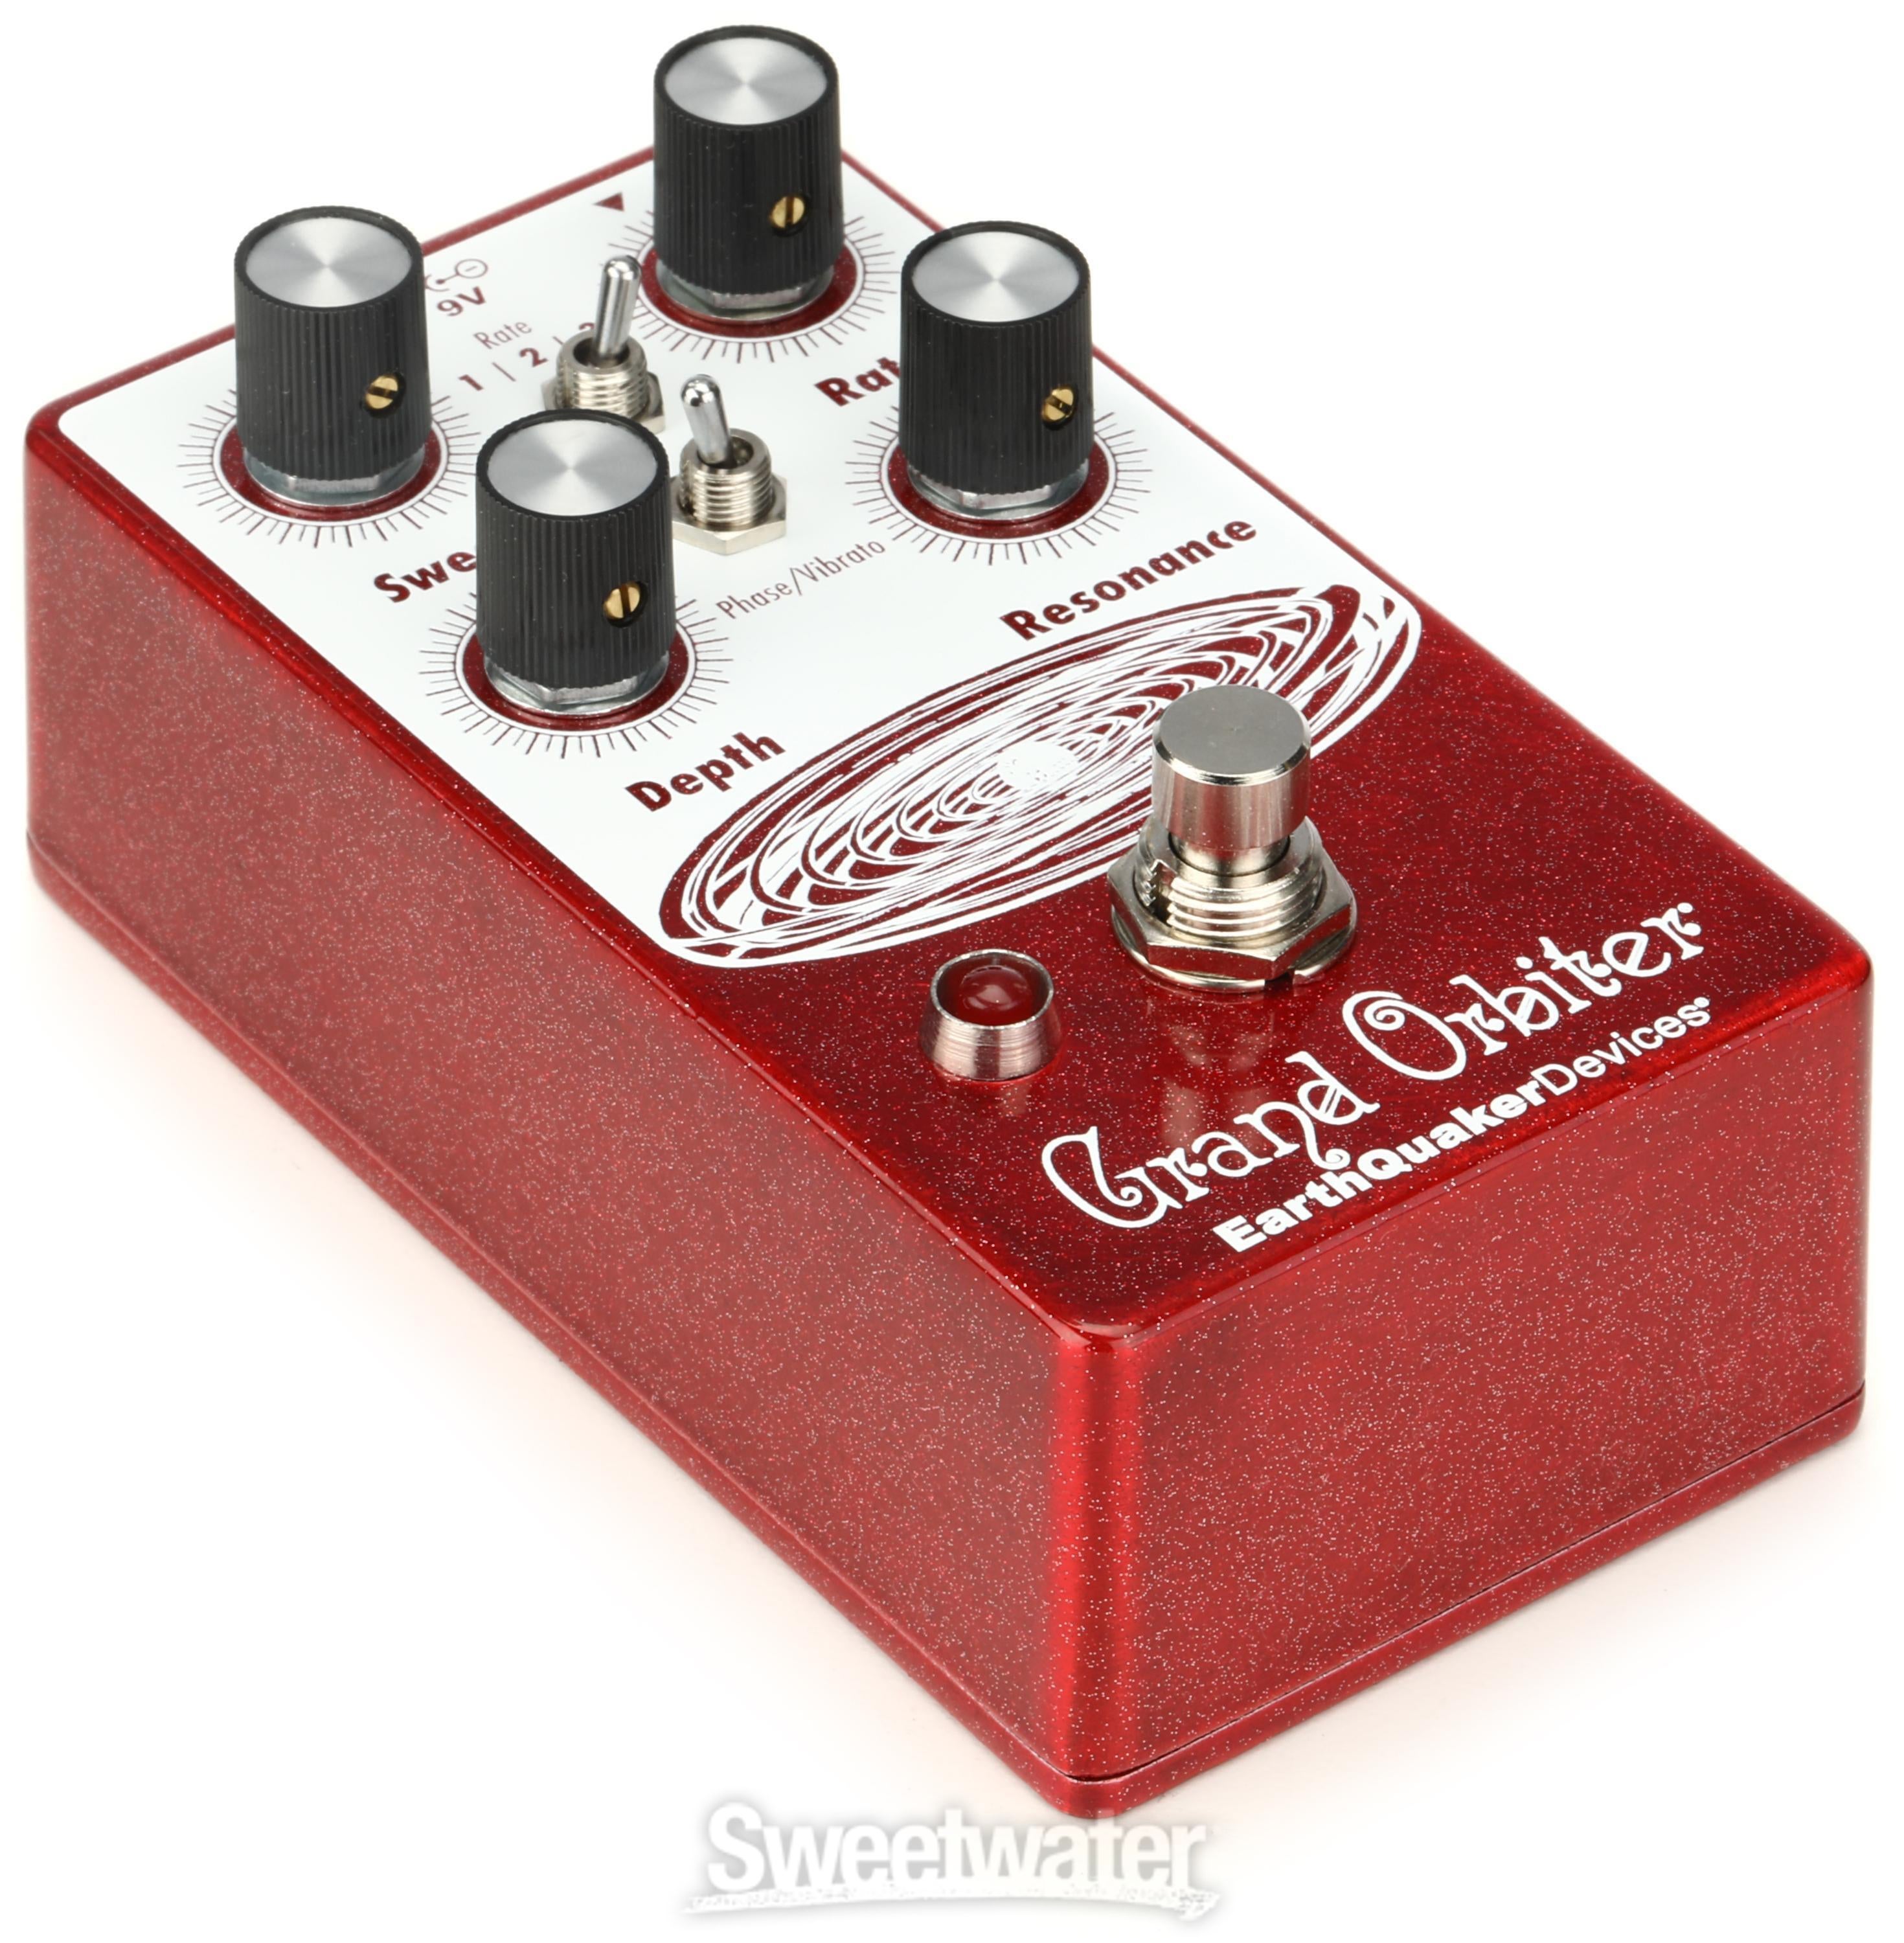 EarthQuaker Devices Grand Orbiter V3 Phaser Pedal | Sweetwater